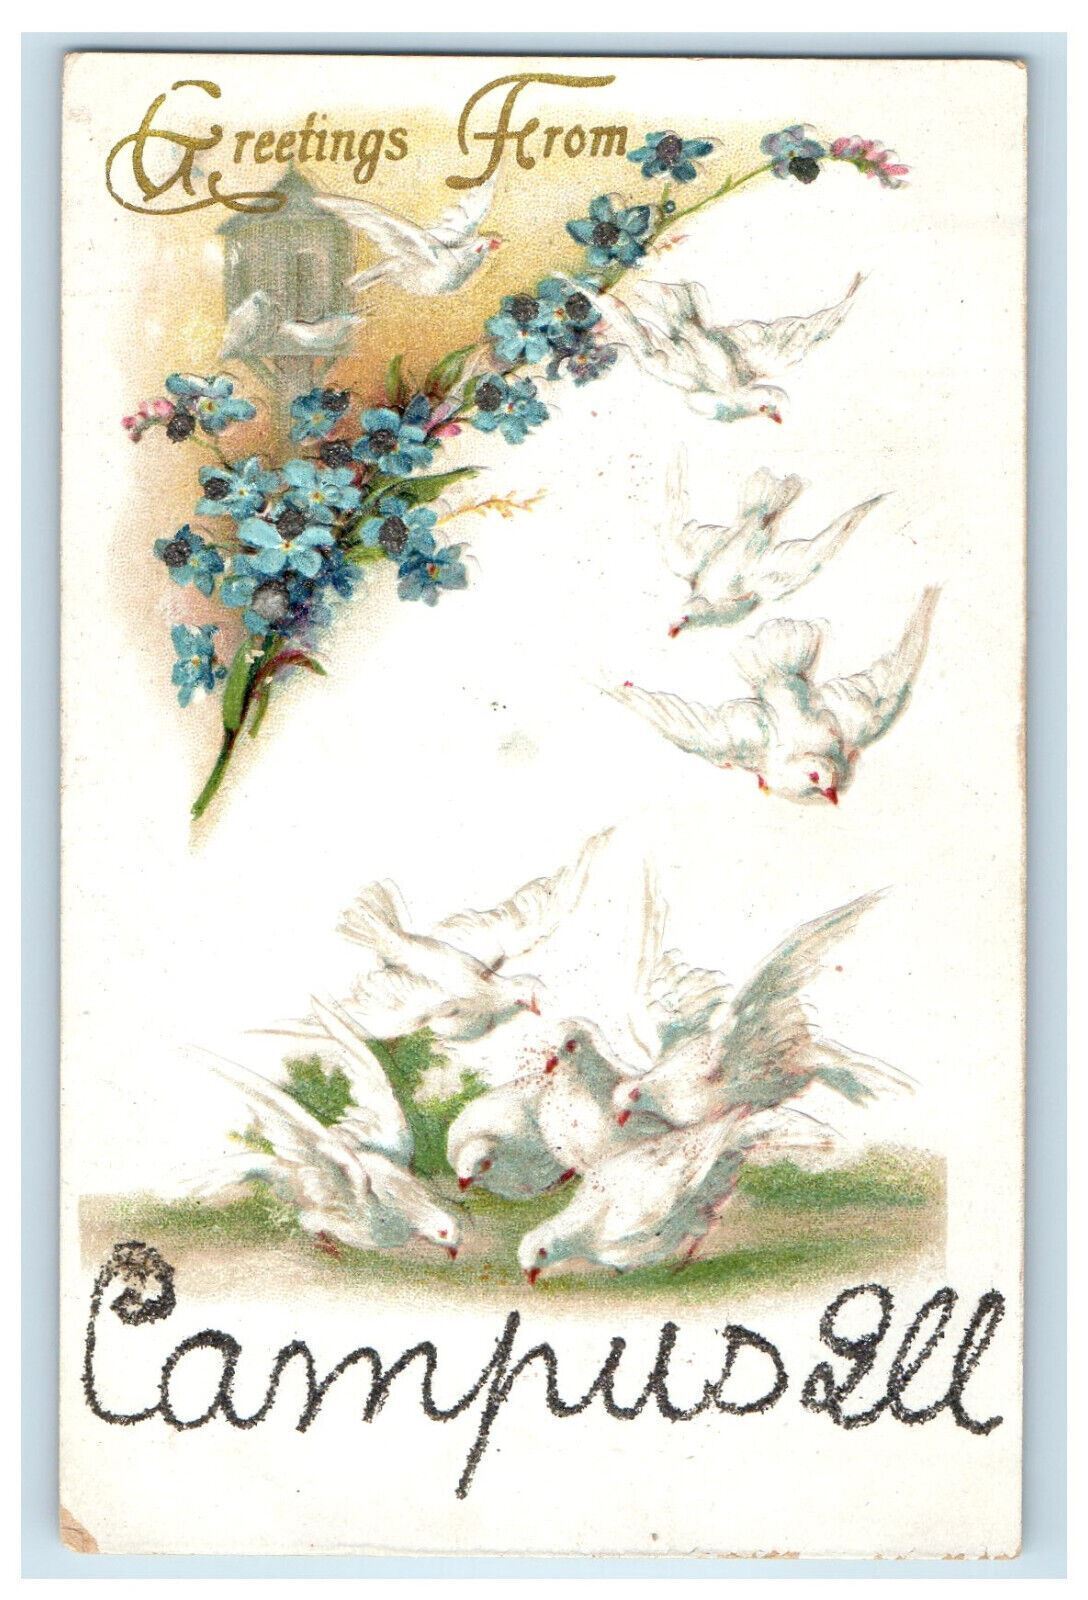 c1910 Doves and Flowers, Greetings from Campus Illinois IL Glitters Postcard